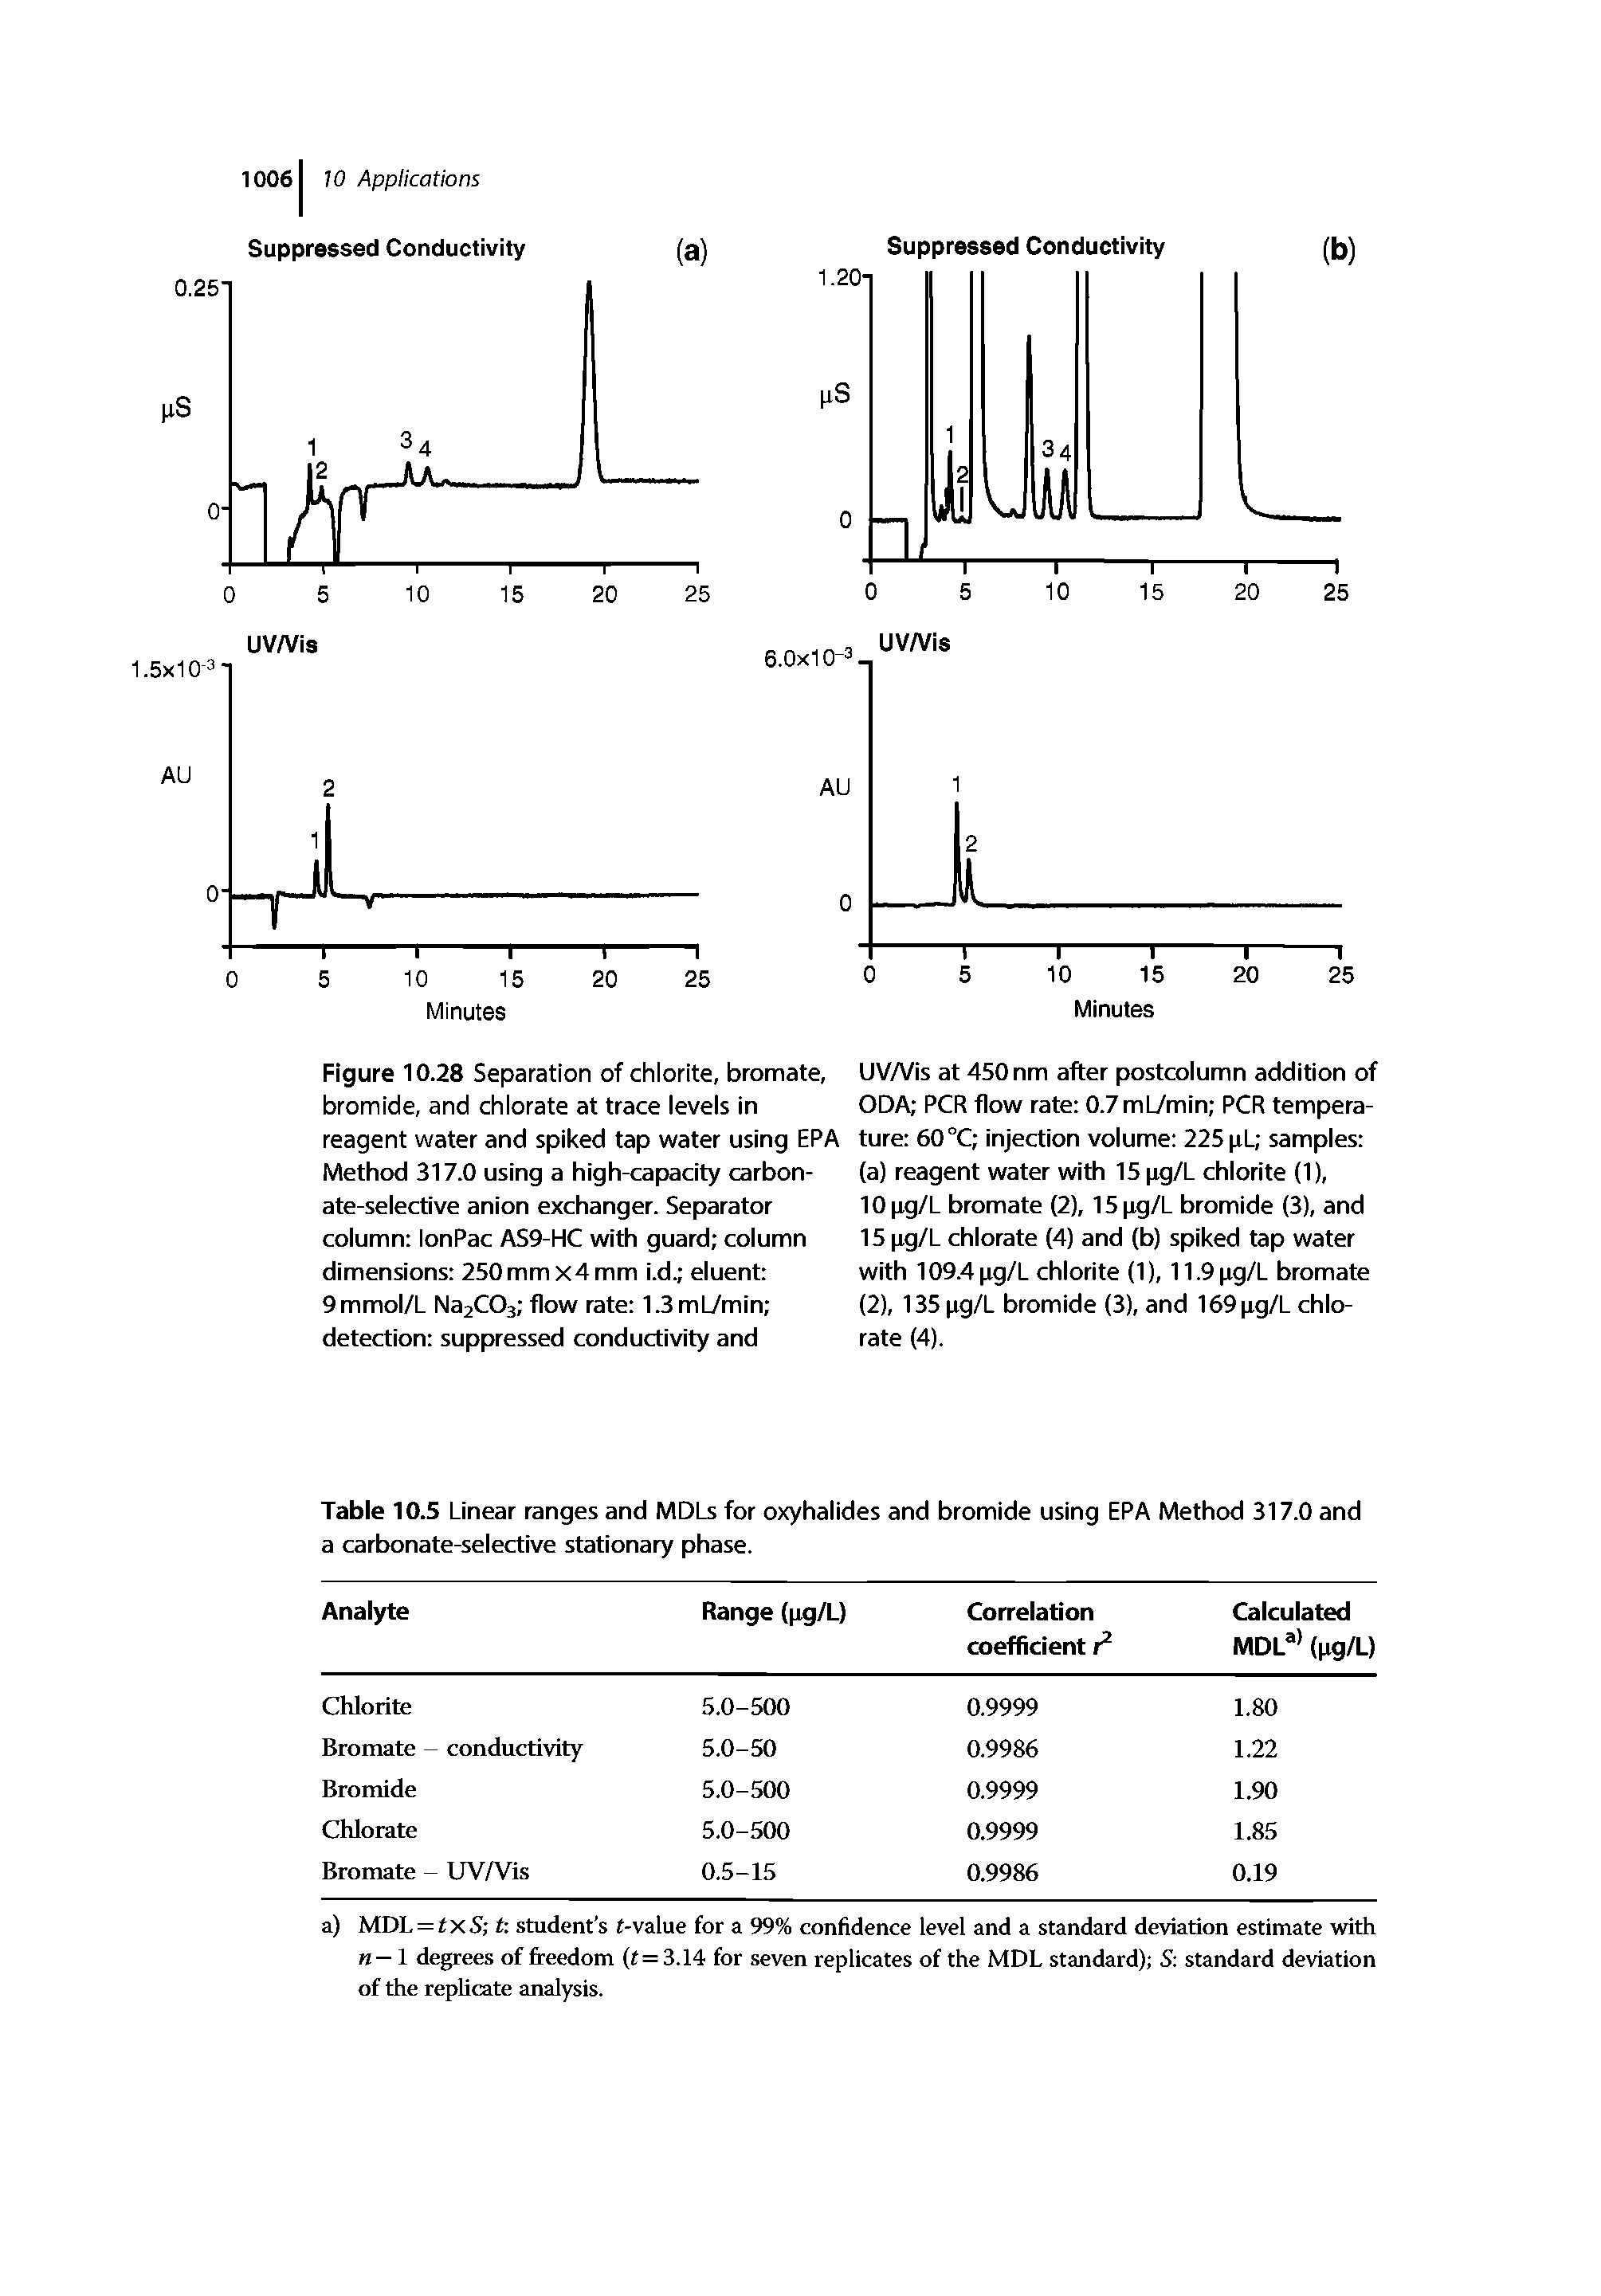 Figure 10.28 Separation of chlorite, bromate, bromide, and chlorate at trace levels in reagent water and spiked tap water using ERA Method 317.0 using a high-capacity carbon-ate-seiective anion exchanger. Separator coiumn lonPac AS9-HC with guard coiumn dimensions 250mm x4 mm i.d. eiuent 9mmoi/L Na2C03 flow rate 1.3ml7min detection suppressed conductivity and...